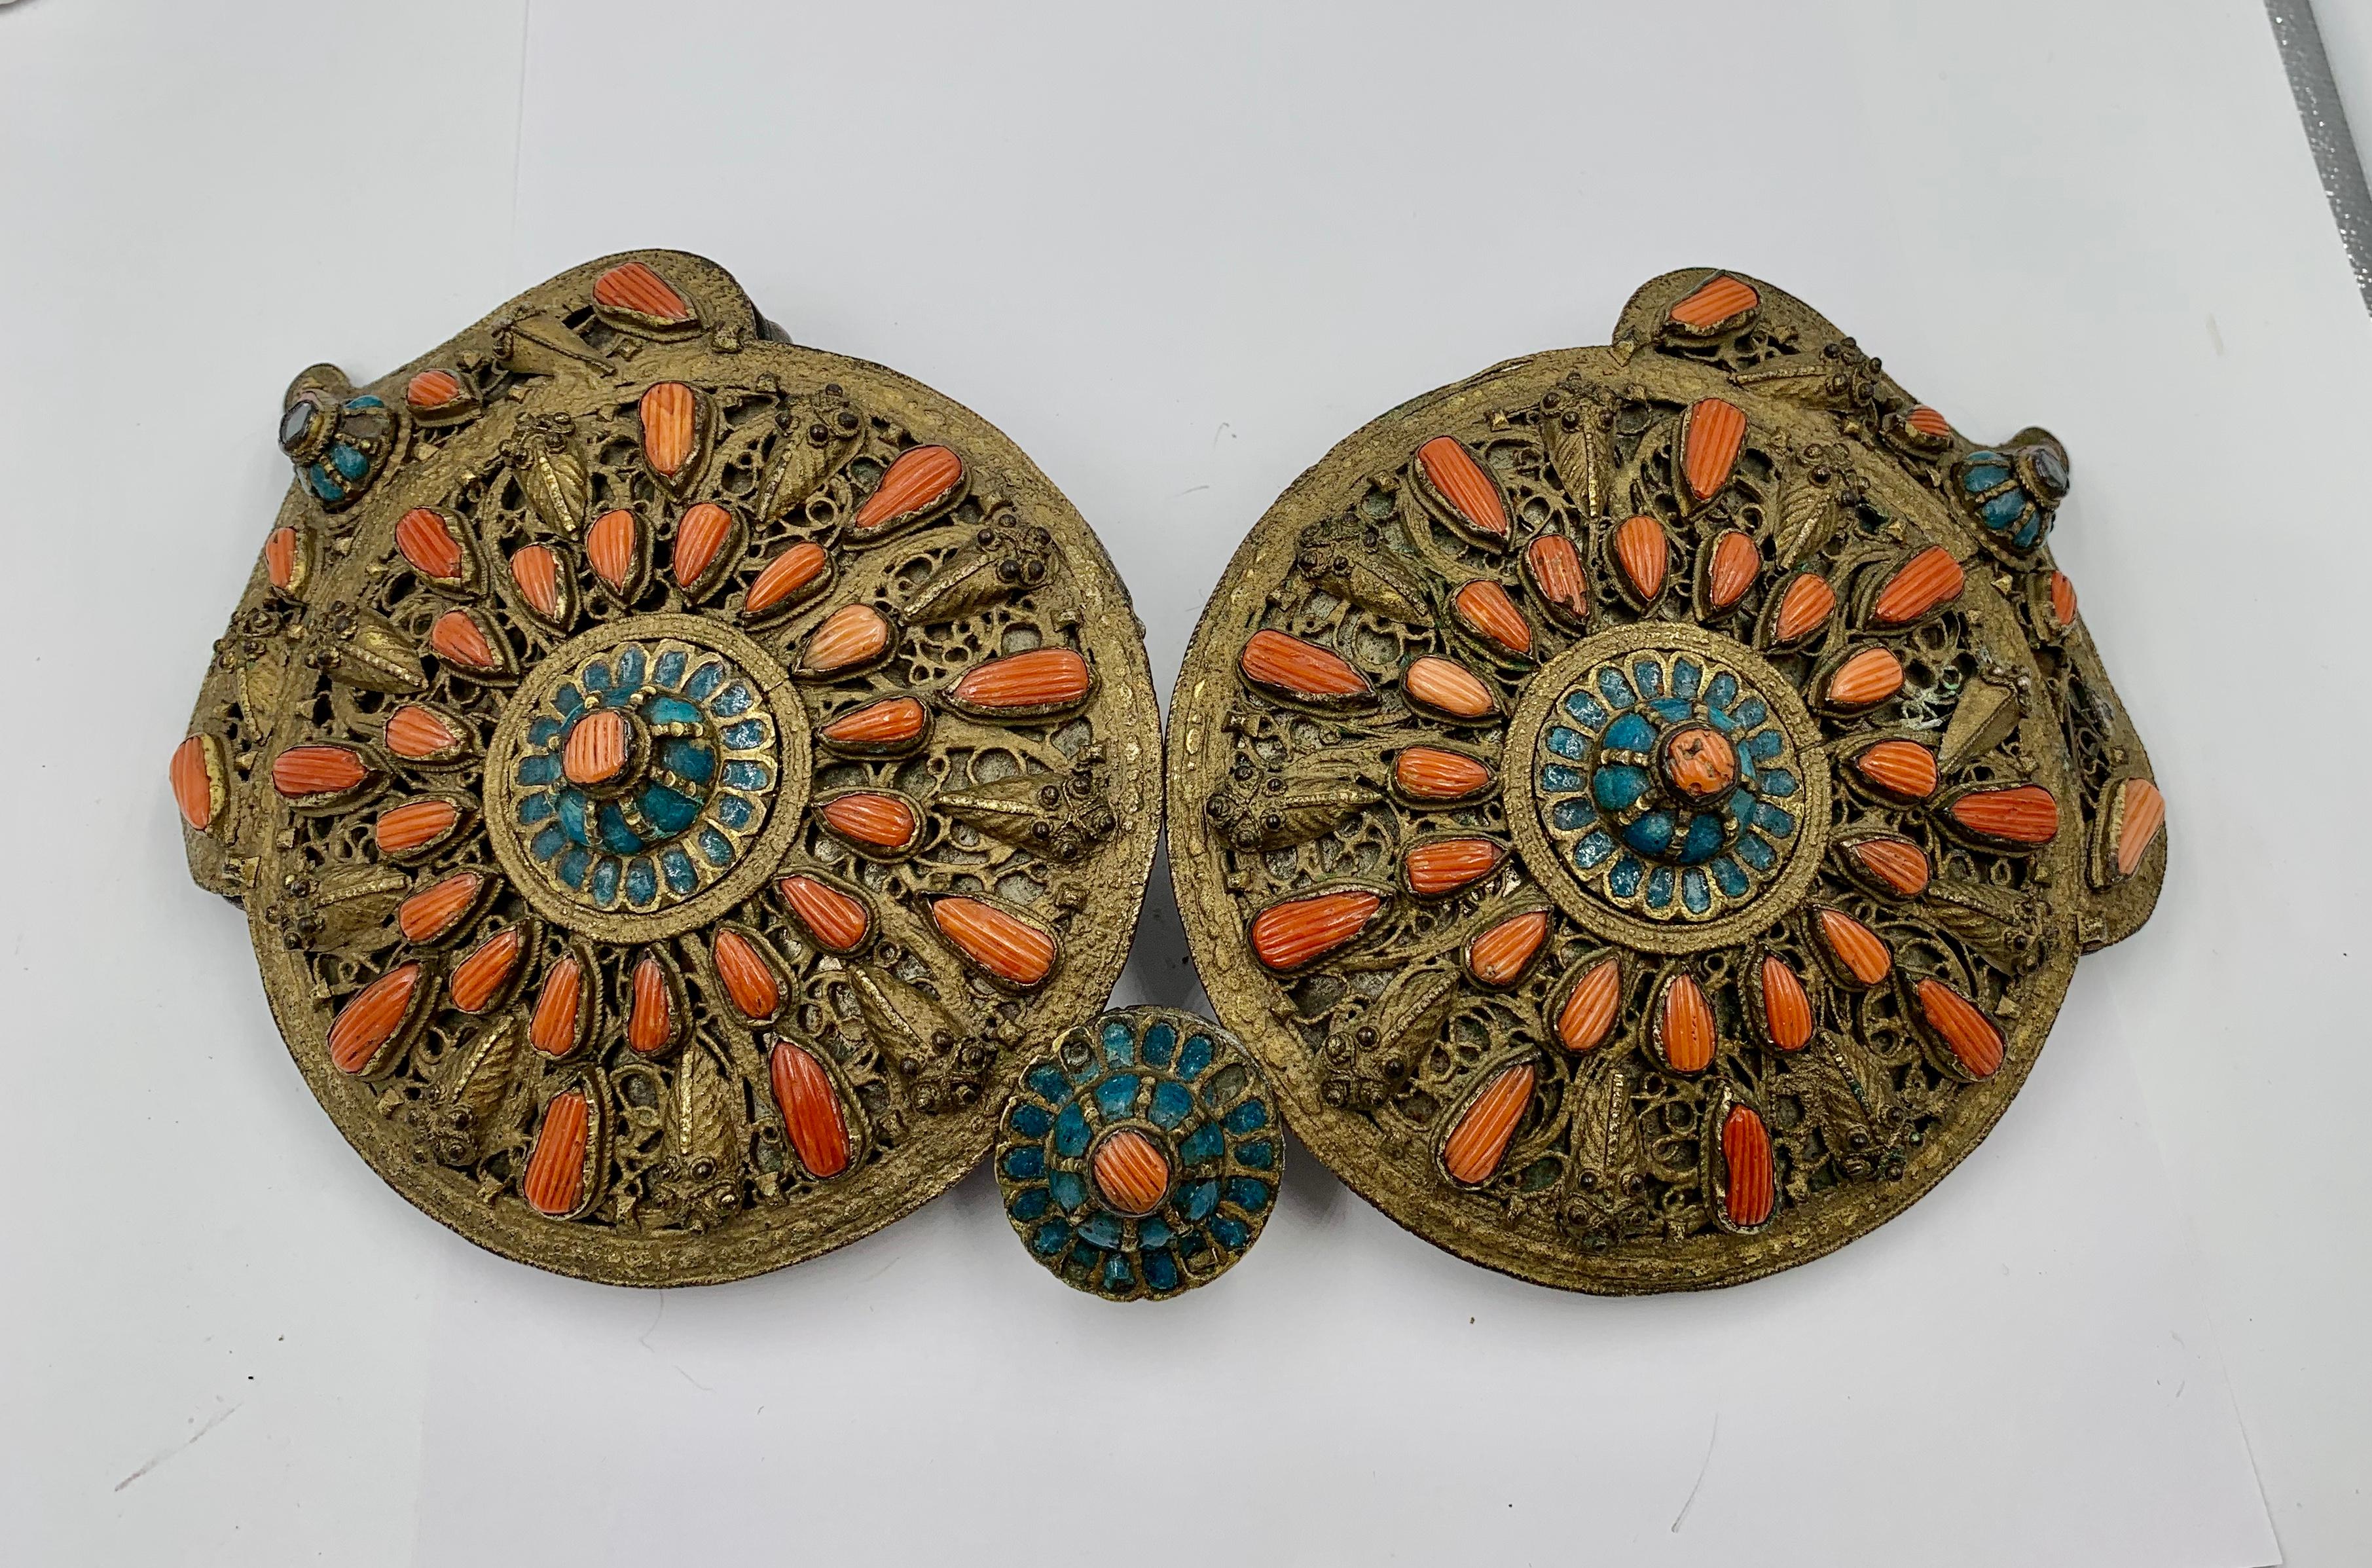 A Museum Quality silver-gilt belt buckle with enamel decoration, and teardrop shaped coral and dating to circa 1830, from Saframpolis (Safranbolu) in the Pontos of Greece, present day Turkey.   There is a similar buckle in the collection of the